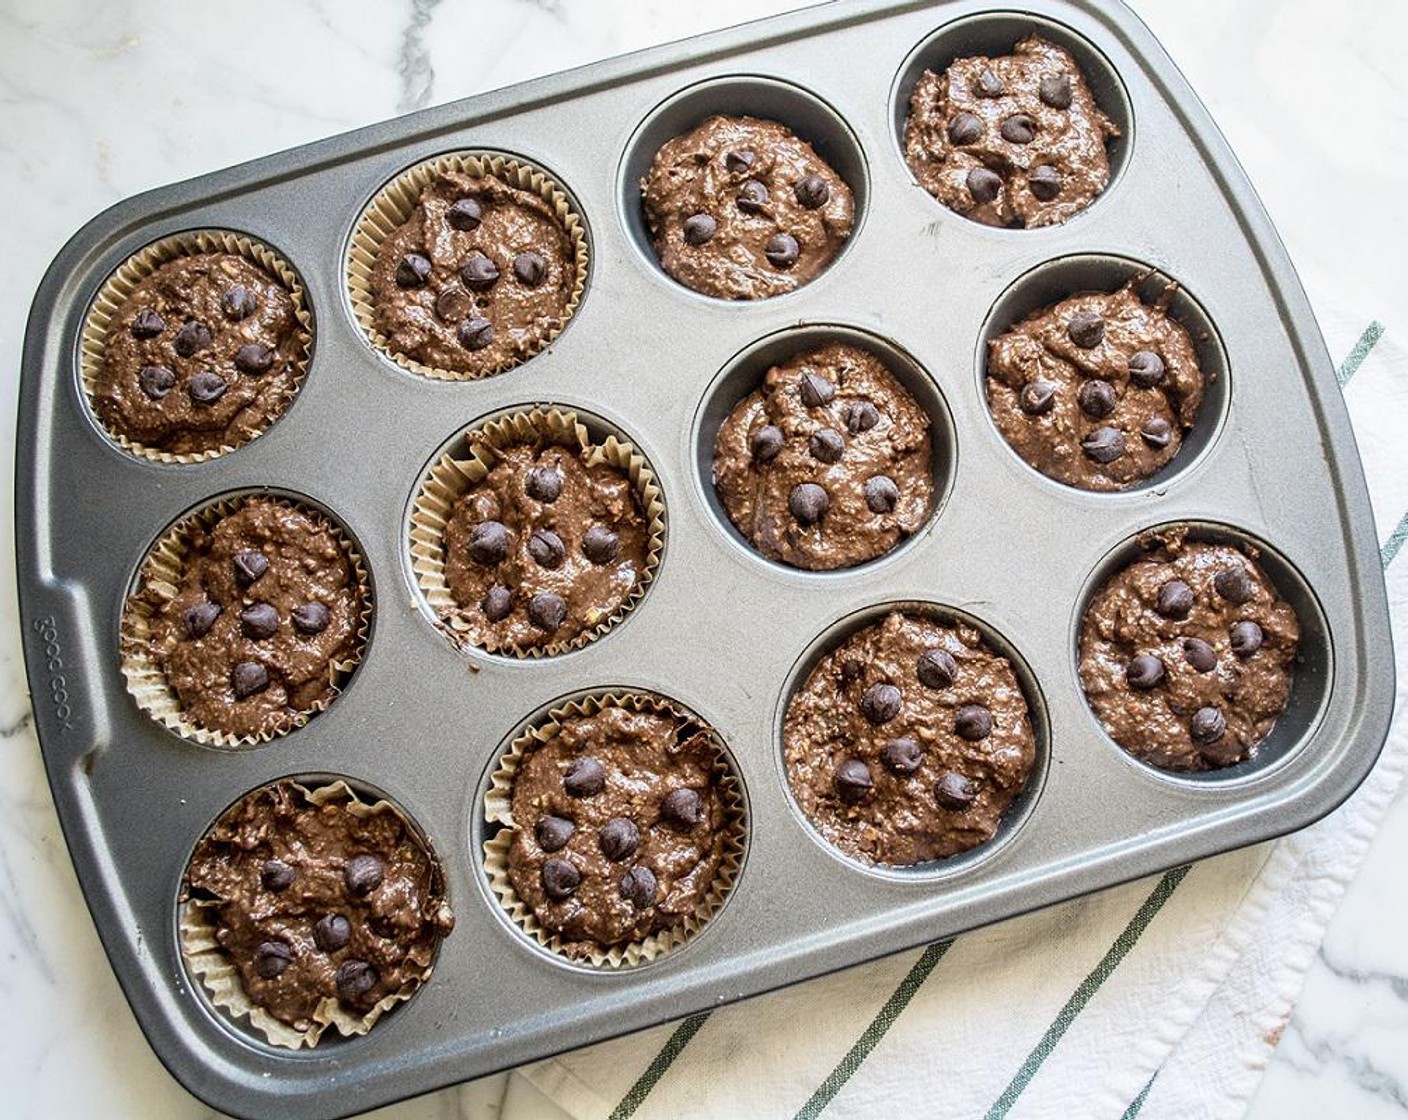 step 6 Stir in Semi-Sweet Chocolate Chips (1/2 cup), then divide equally into 12 muffins, top with remaining Semi-Sweet Chocolate Chips (2 Tbsp).